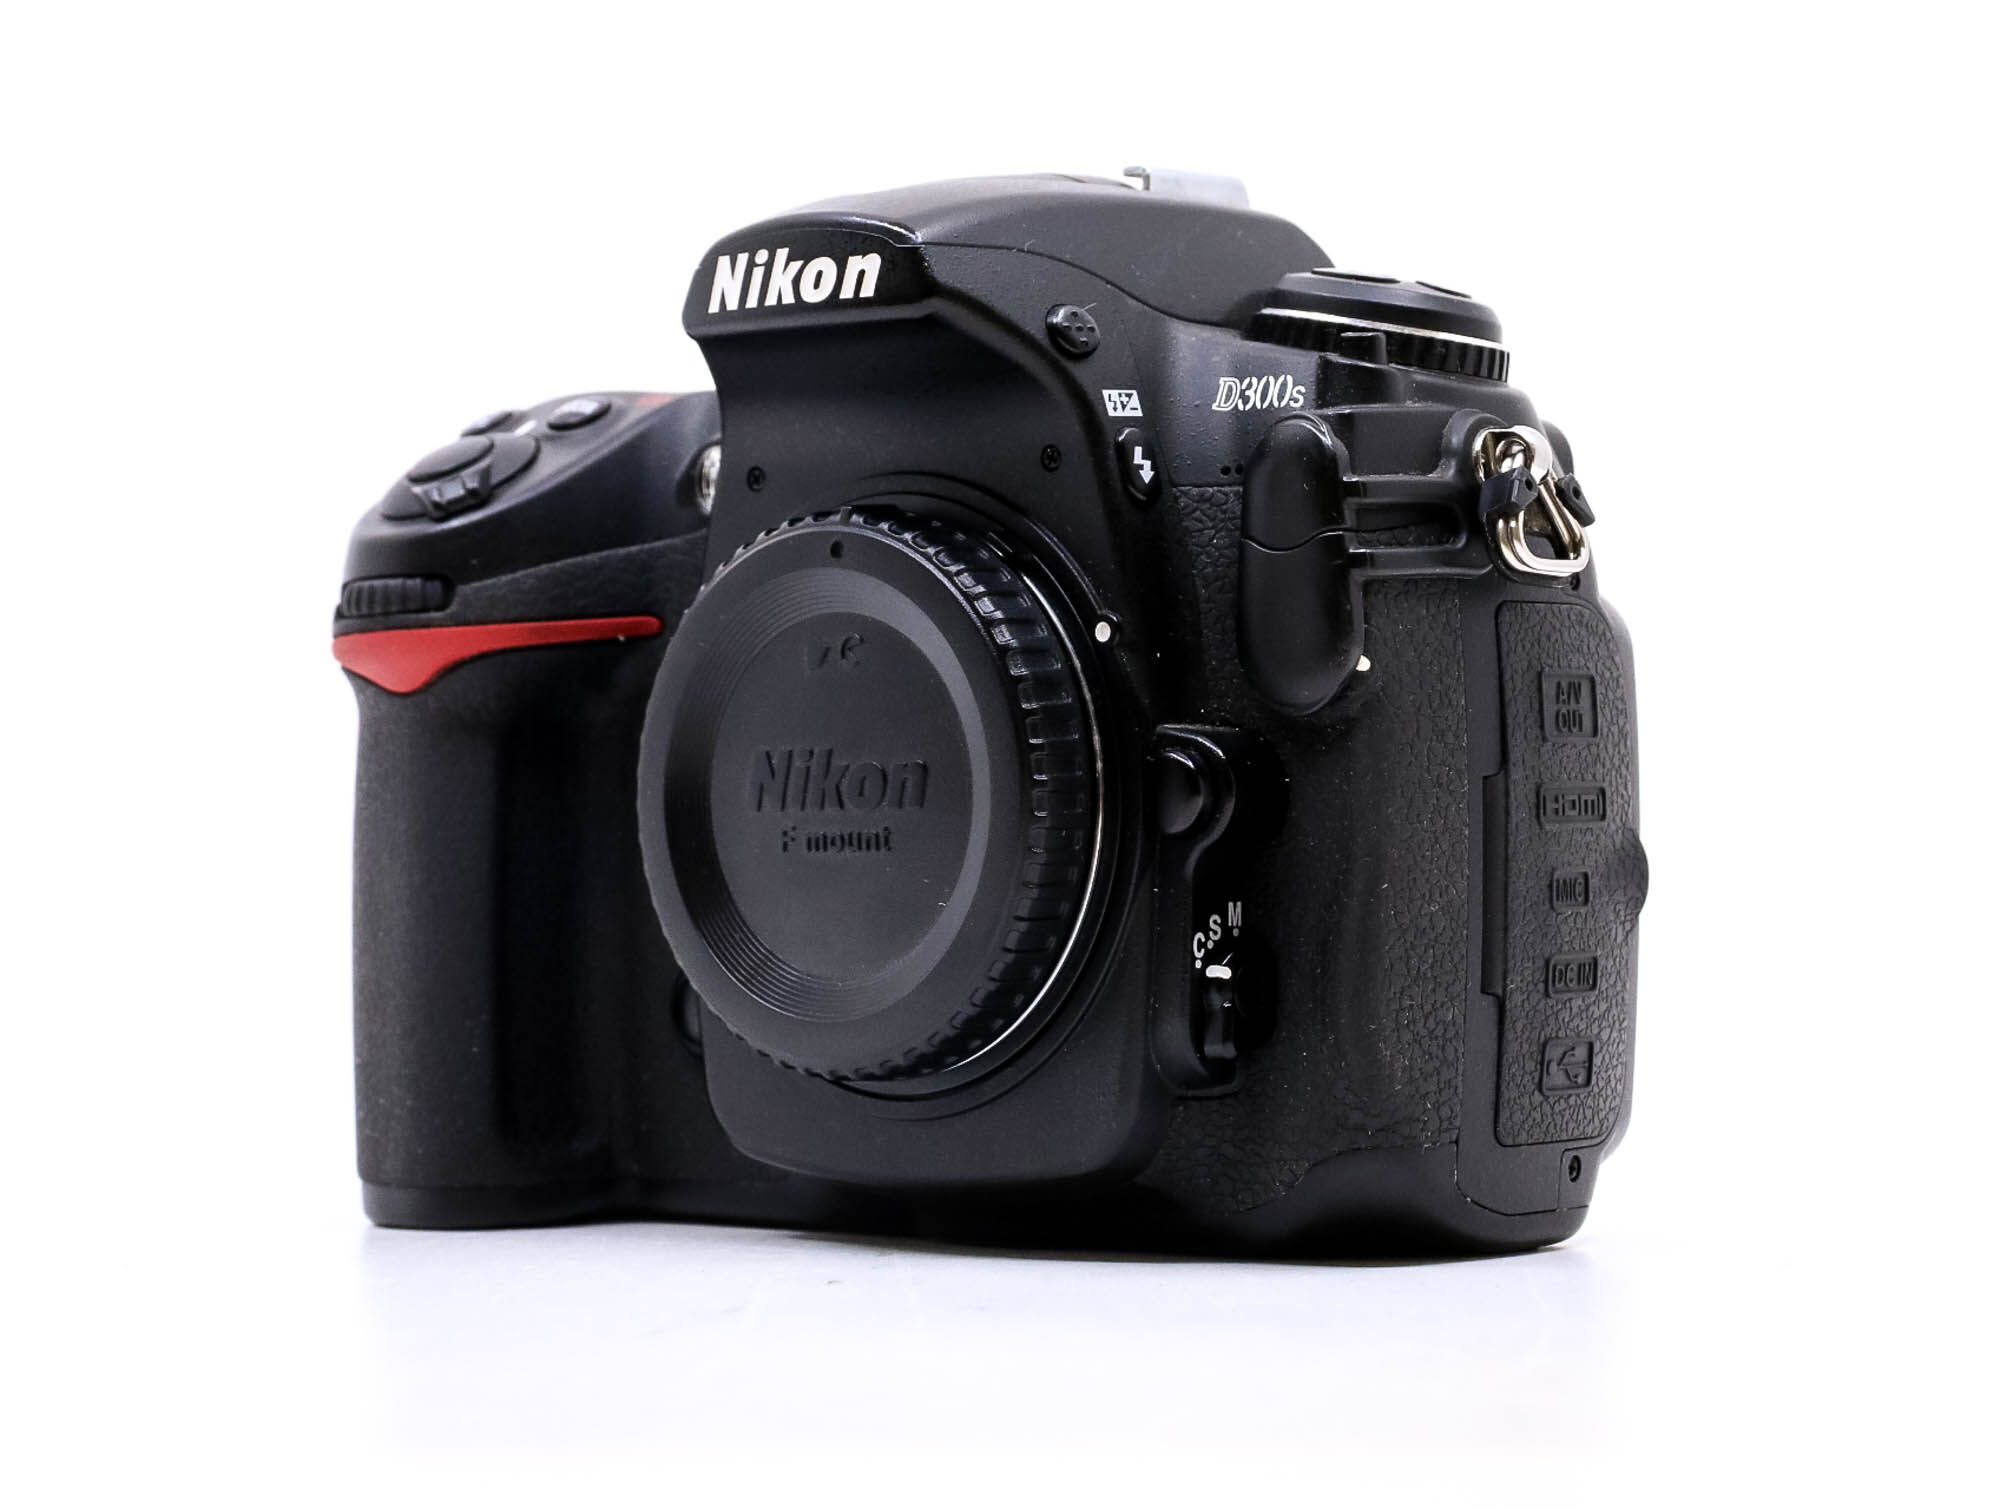 Nikon D300s (Condition: Like New)